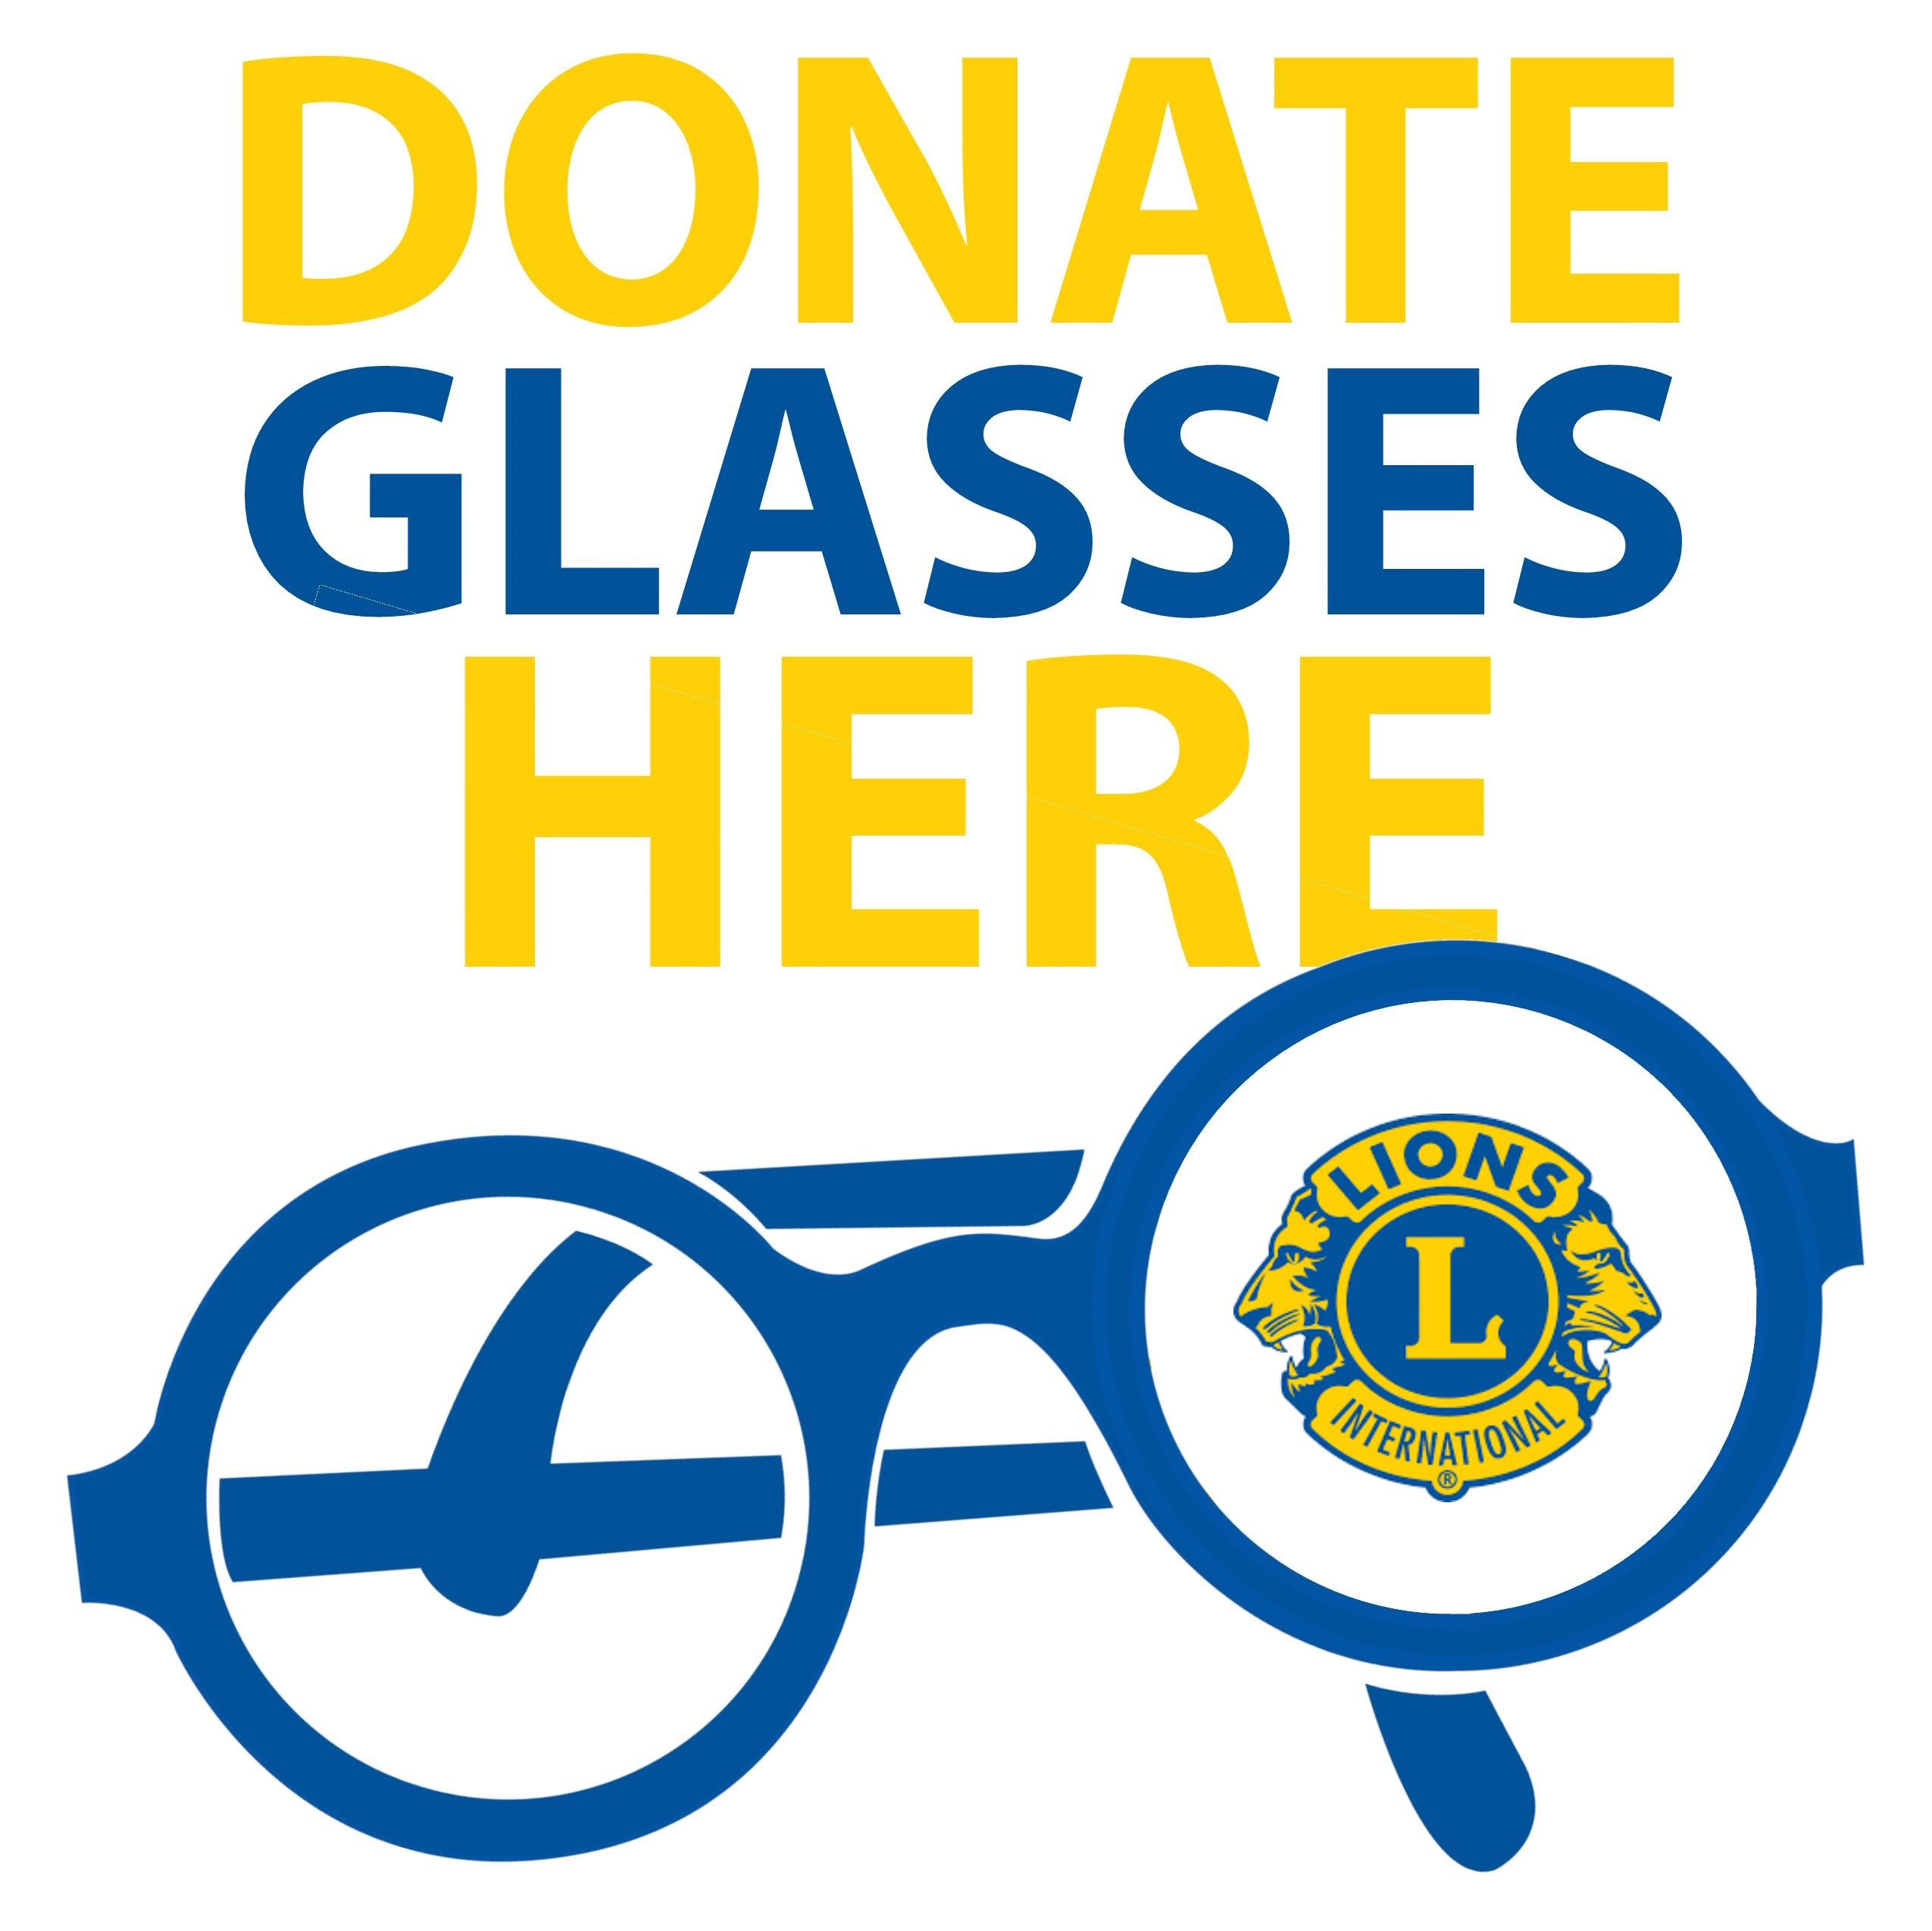 Donate old glasses here. Lions Club International